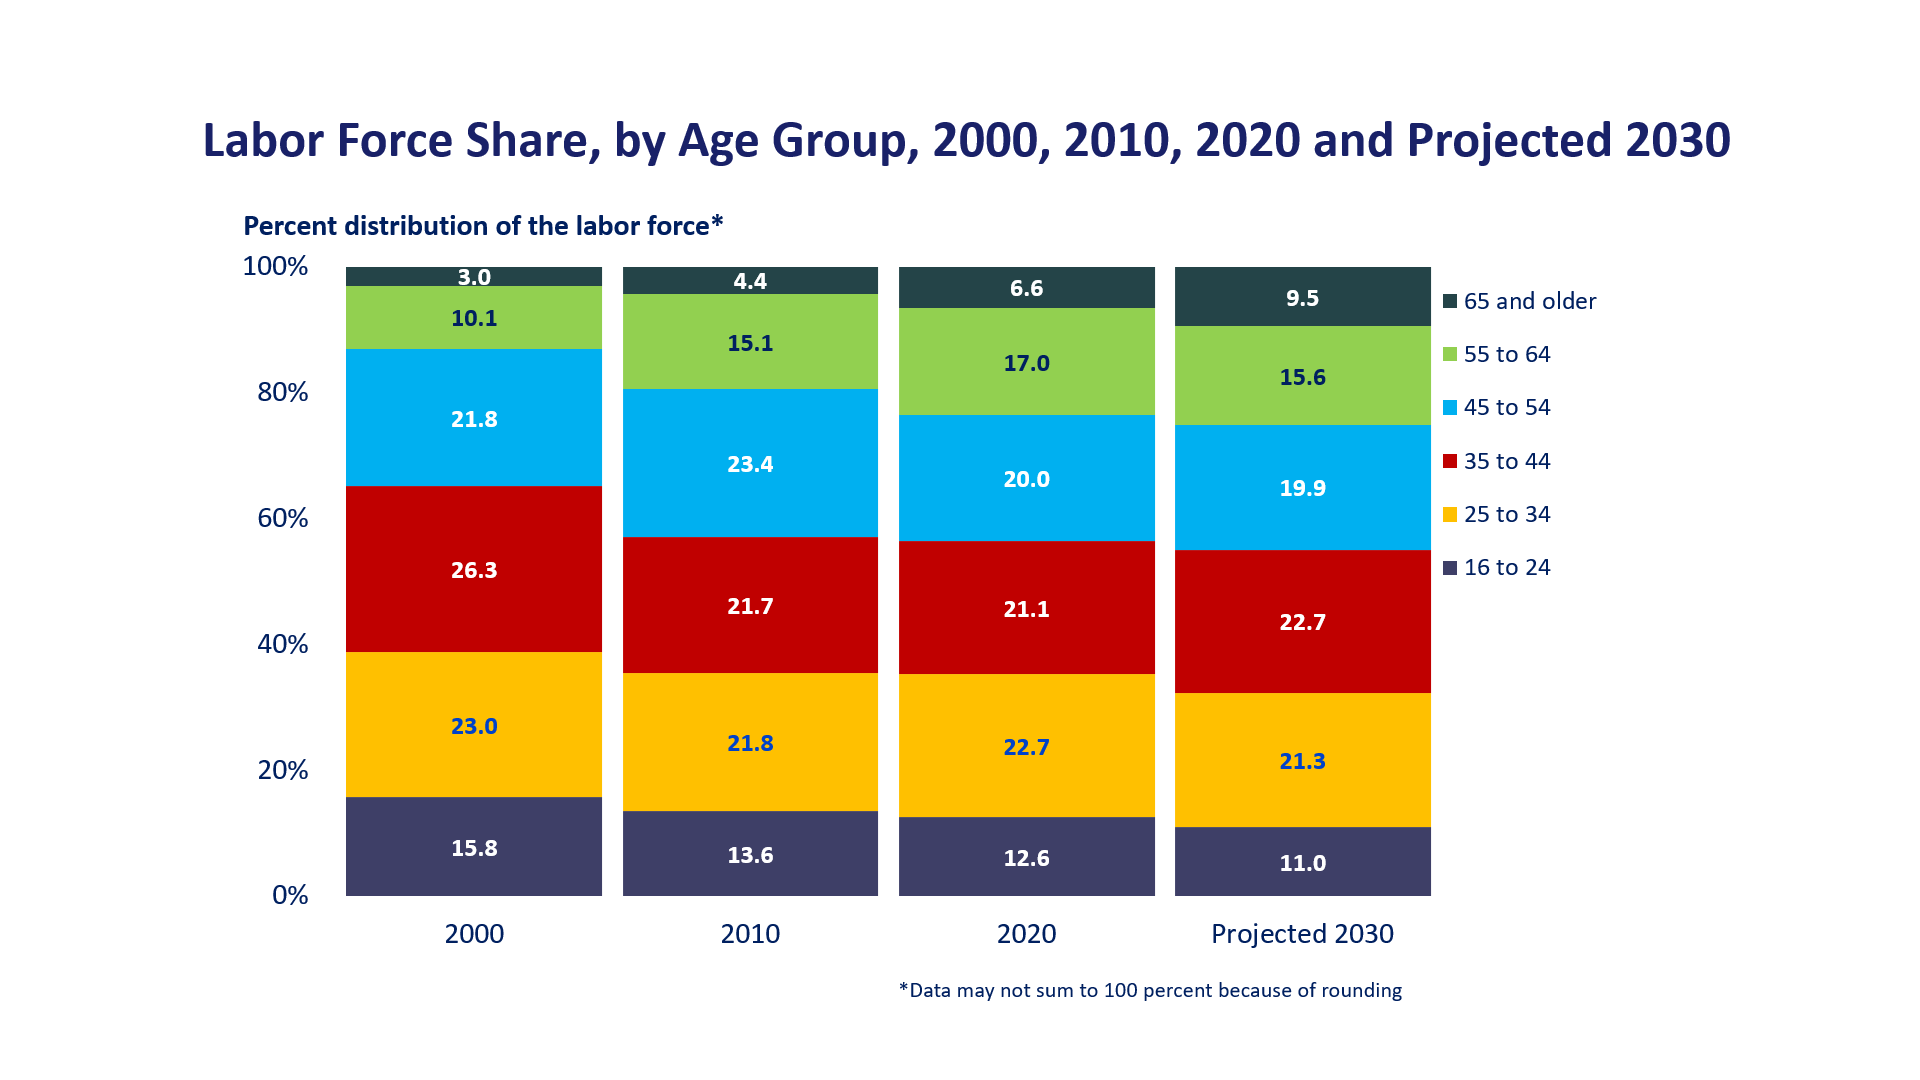 Labor force share, by age group, 2000, 2010, 2020, and projected 2030